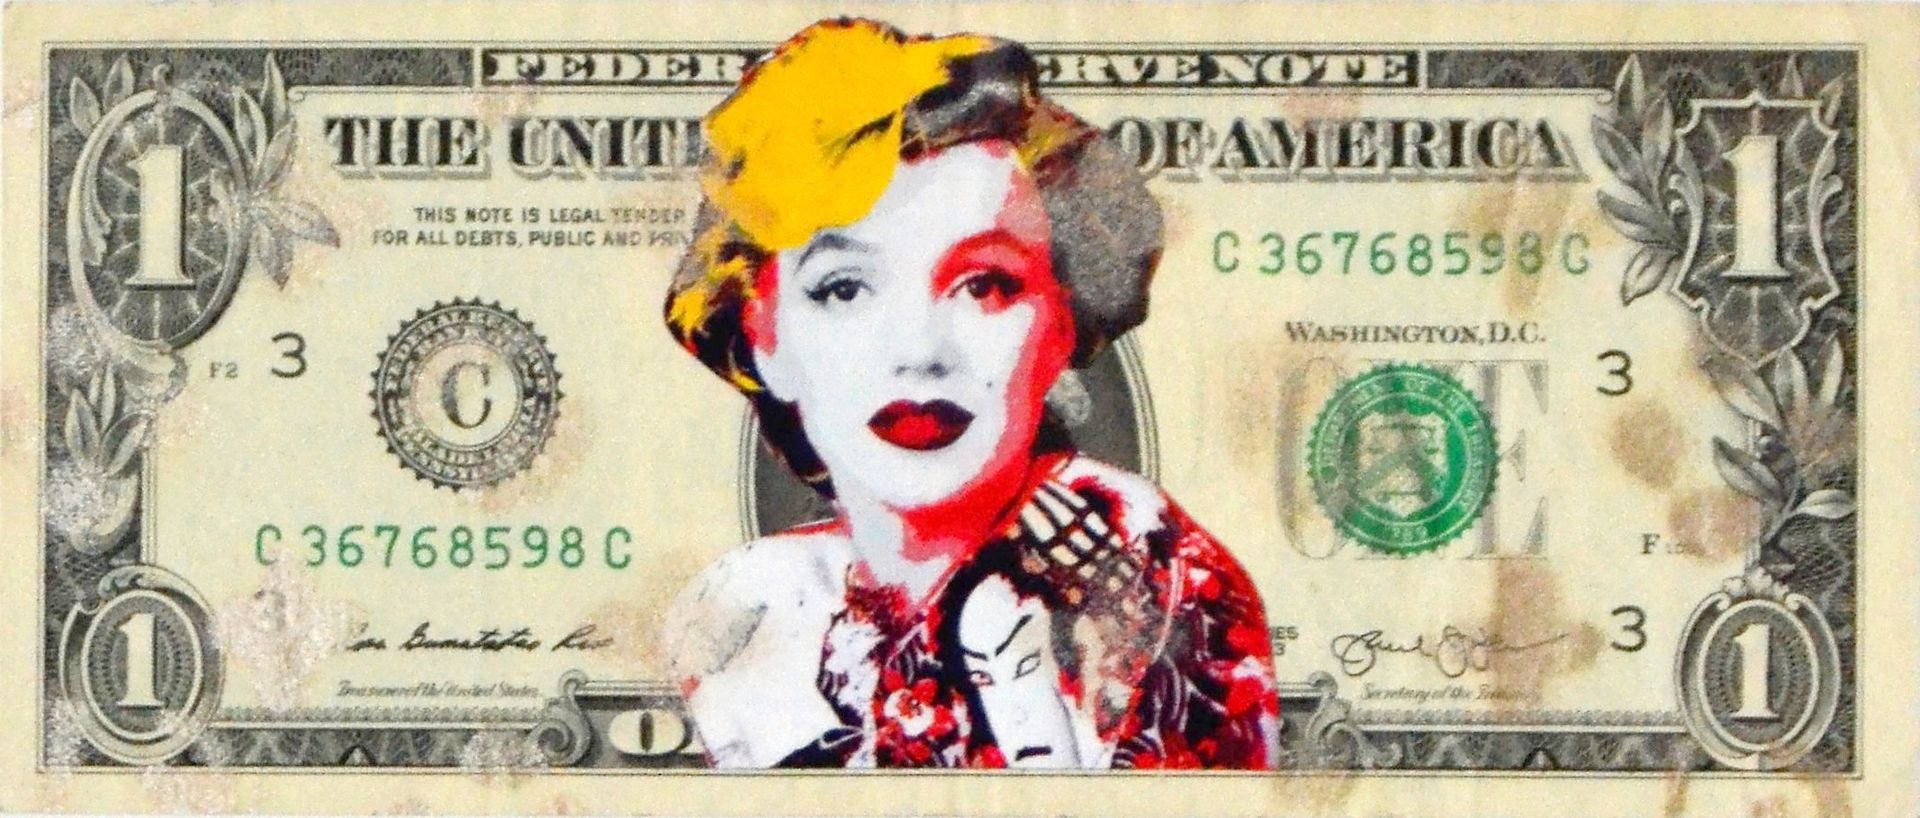 Death NYC Death NYC

Marilyn Tattoo, 2013

Collage and mixed media on banknote

&hellip;